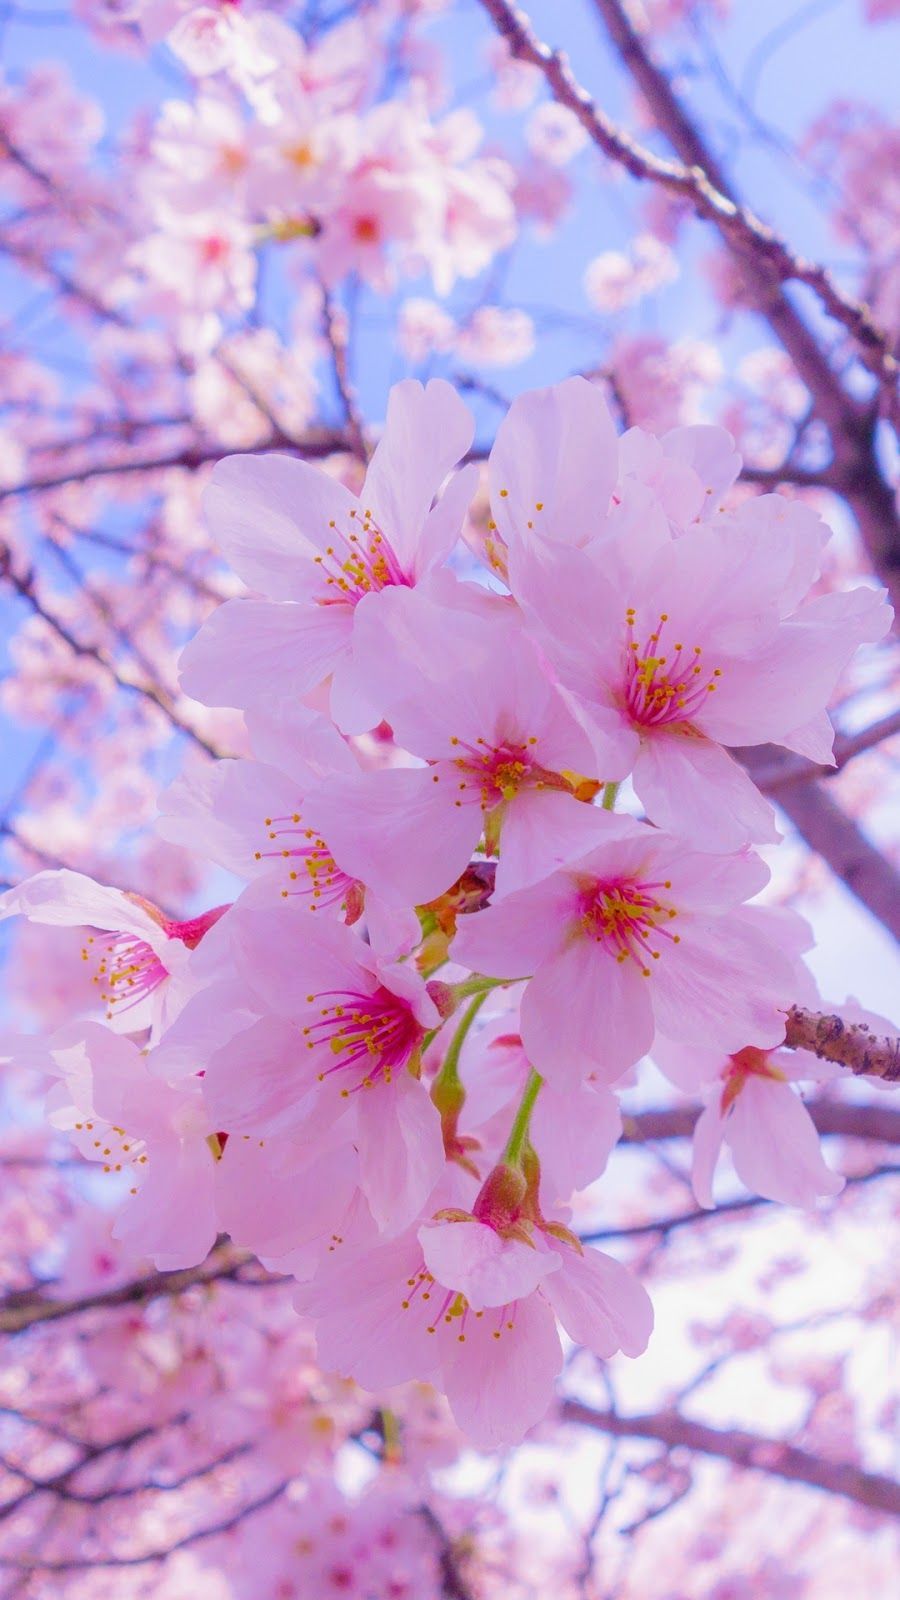 A tree with pink flowers in the sky - Cherry blossom